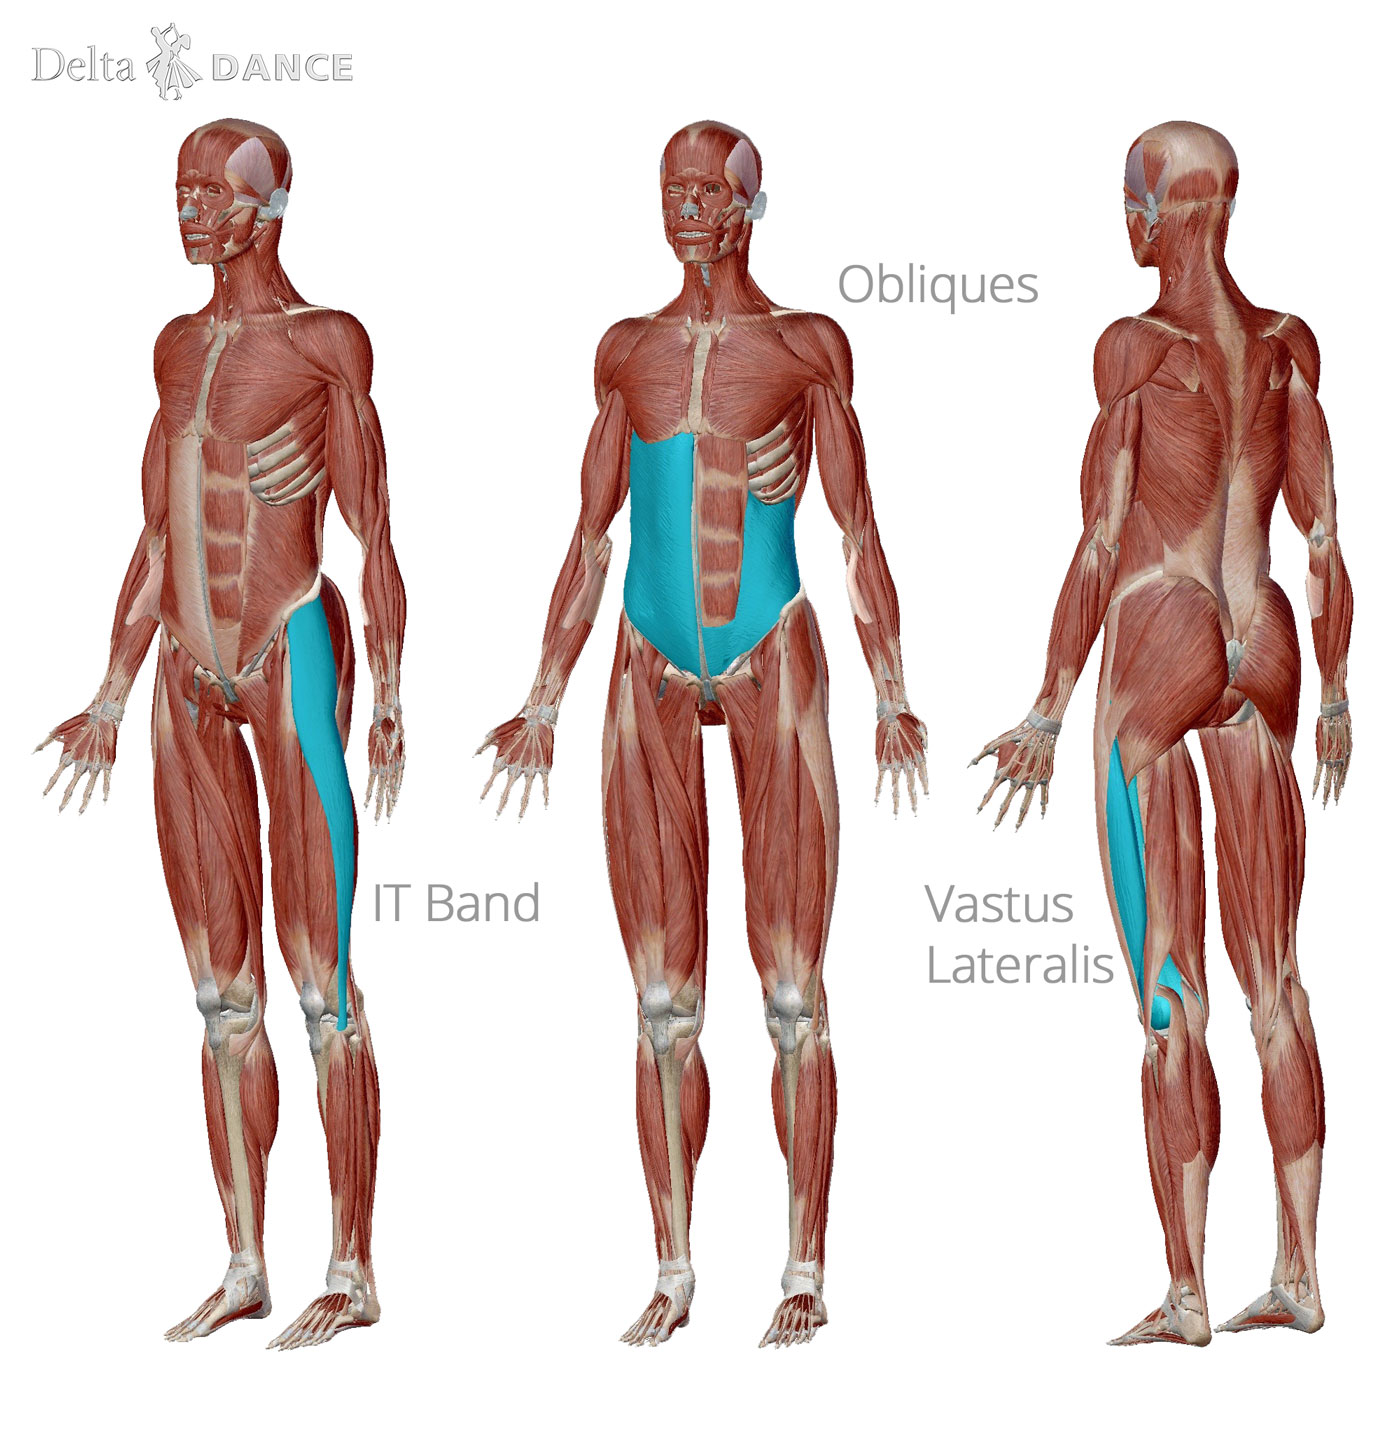 Rotational muscles used for dancing